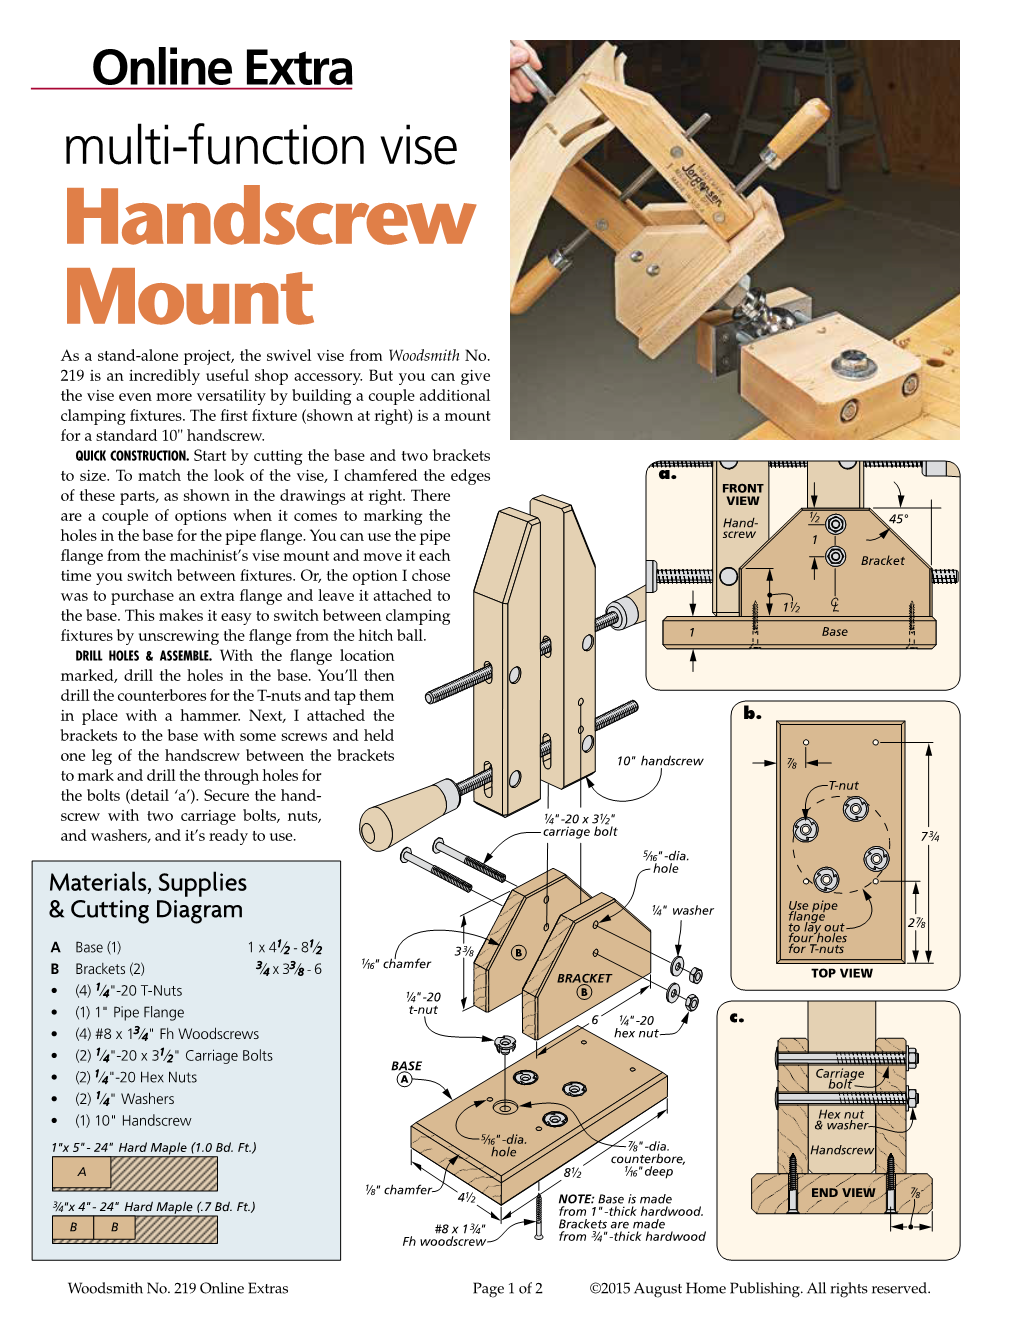 Handscrew Mount As a Stand-Alone Project, the Swivel Vise from Woodsmith No